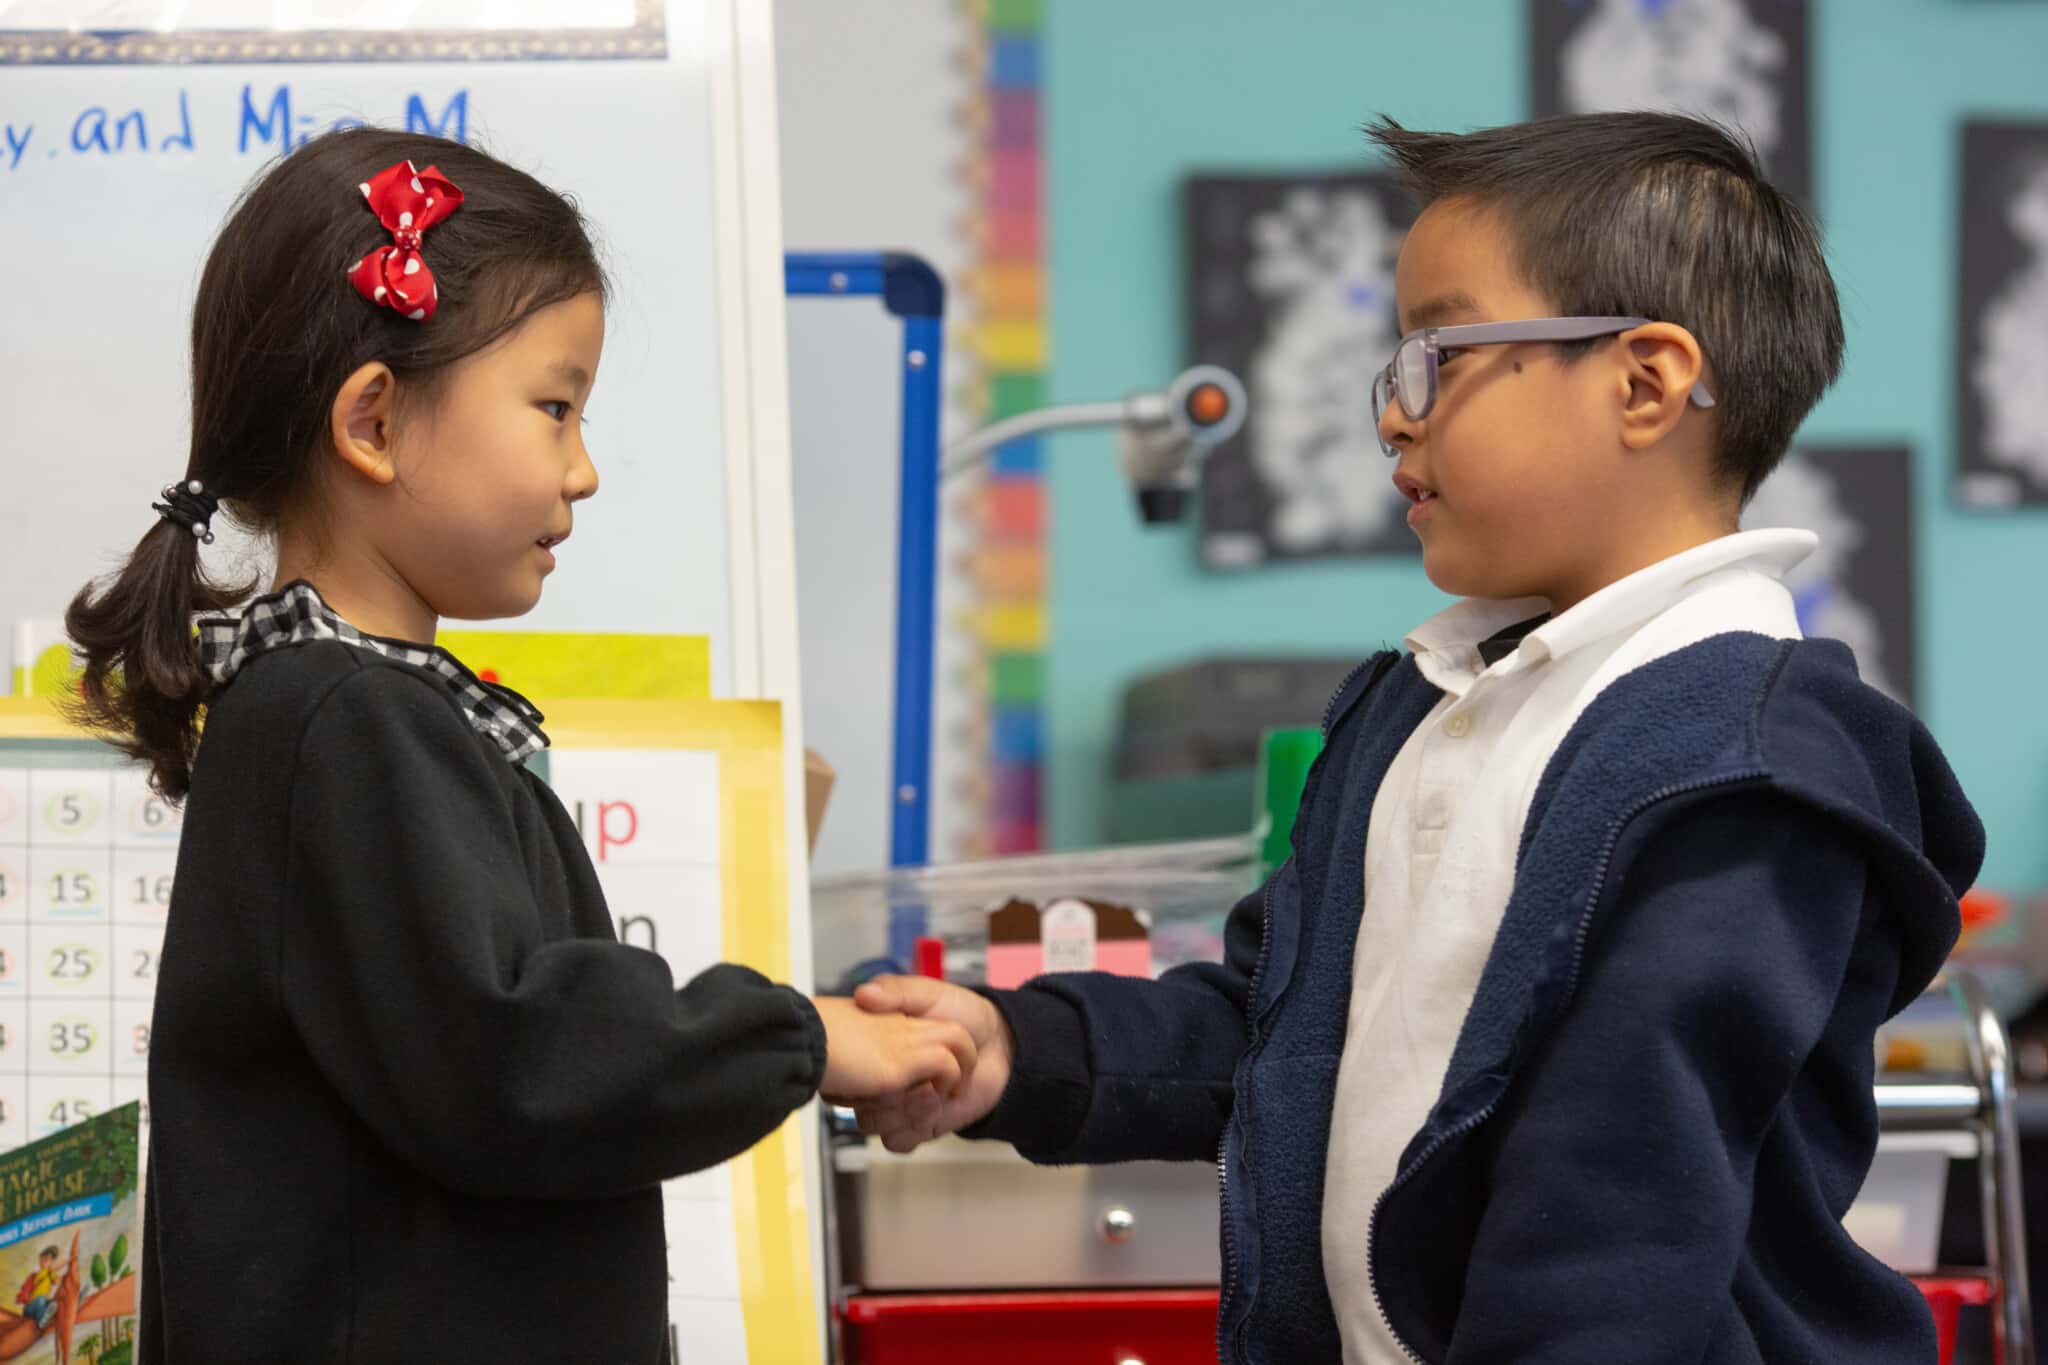 A girl child and boy child shaking hands in their classroom